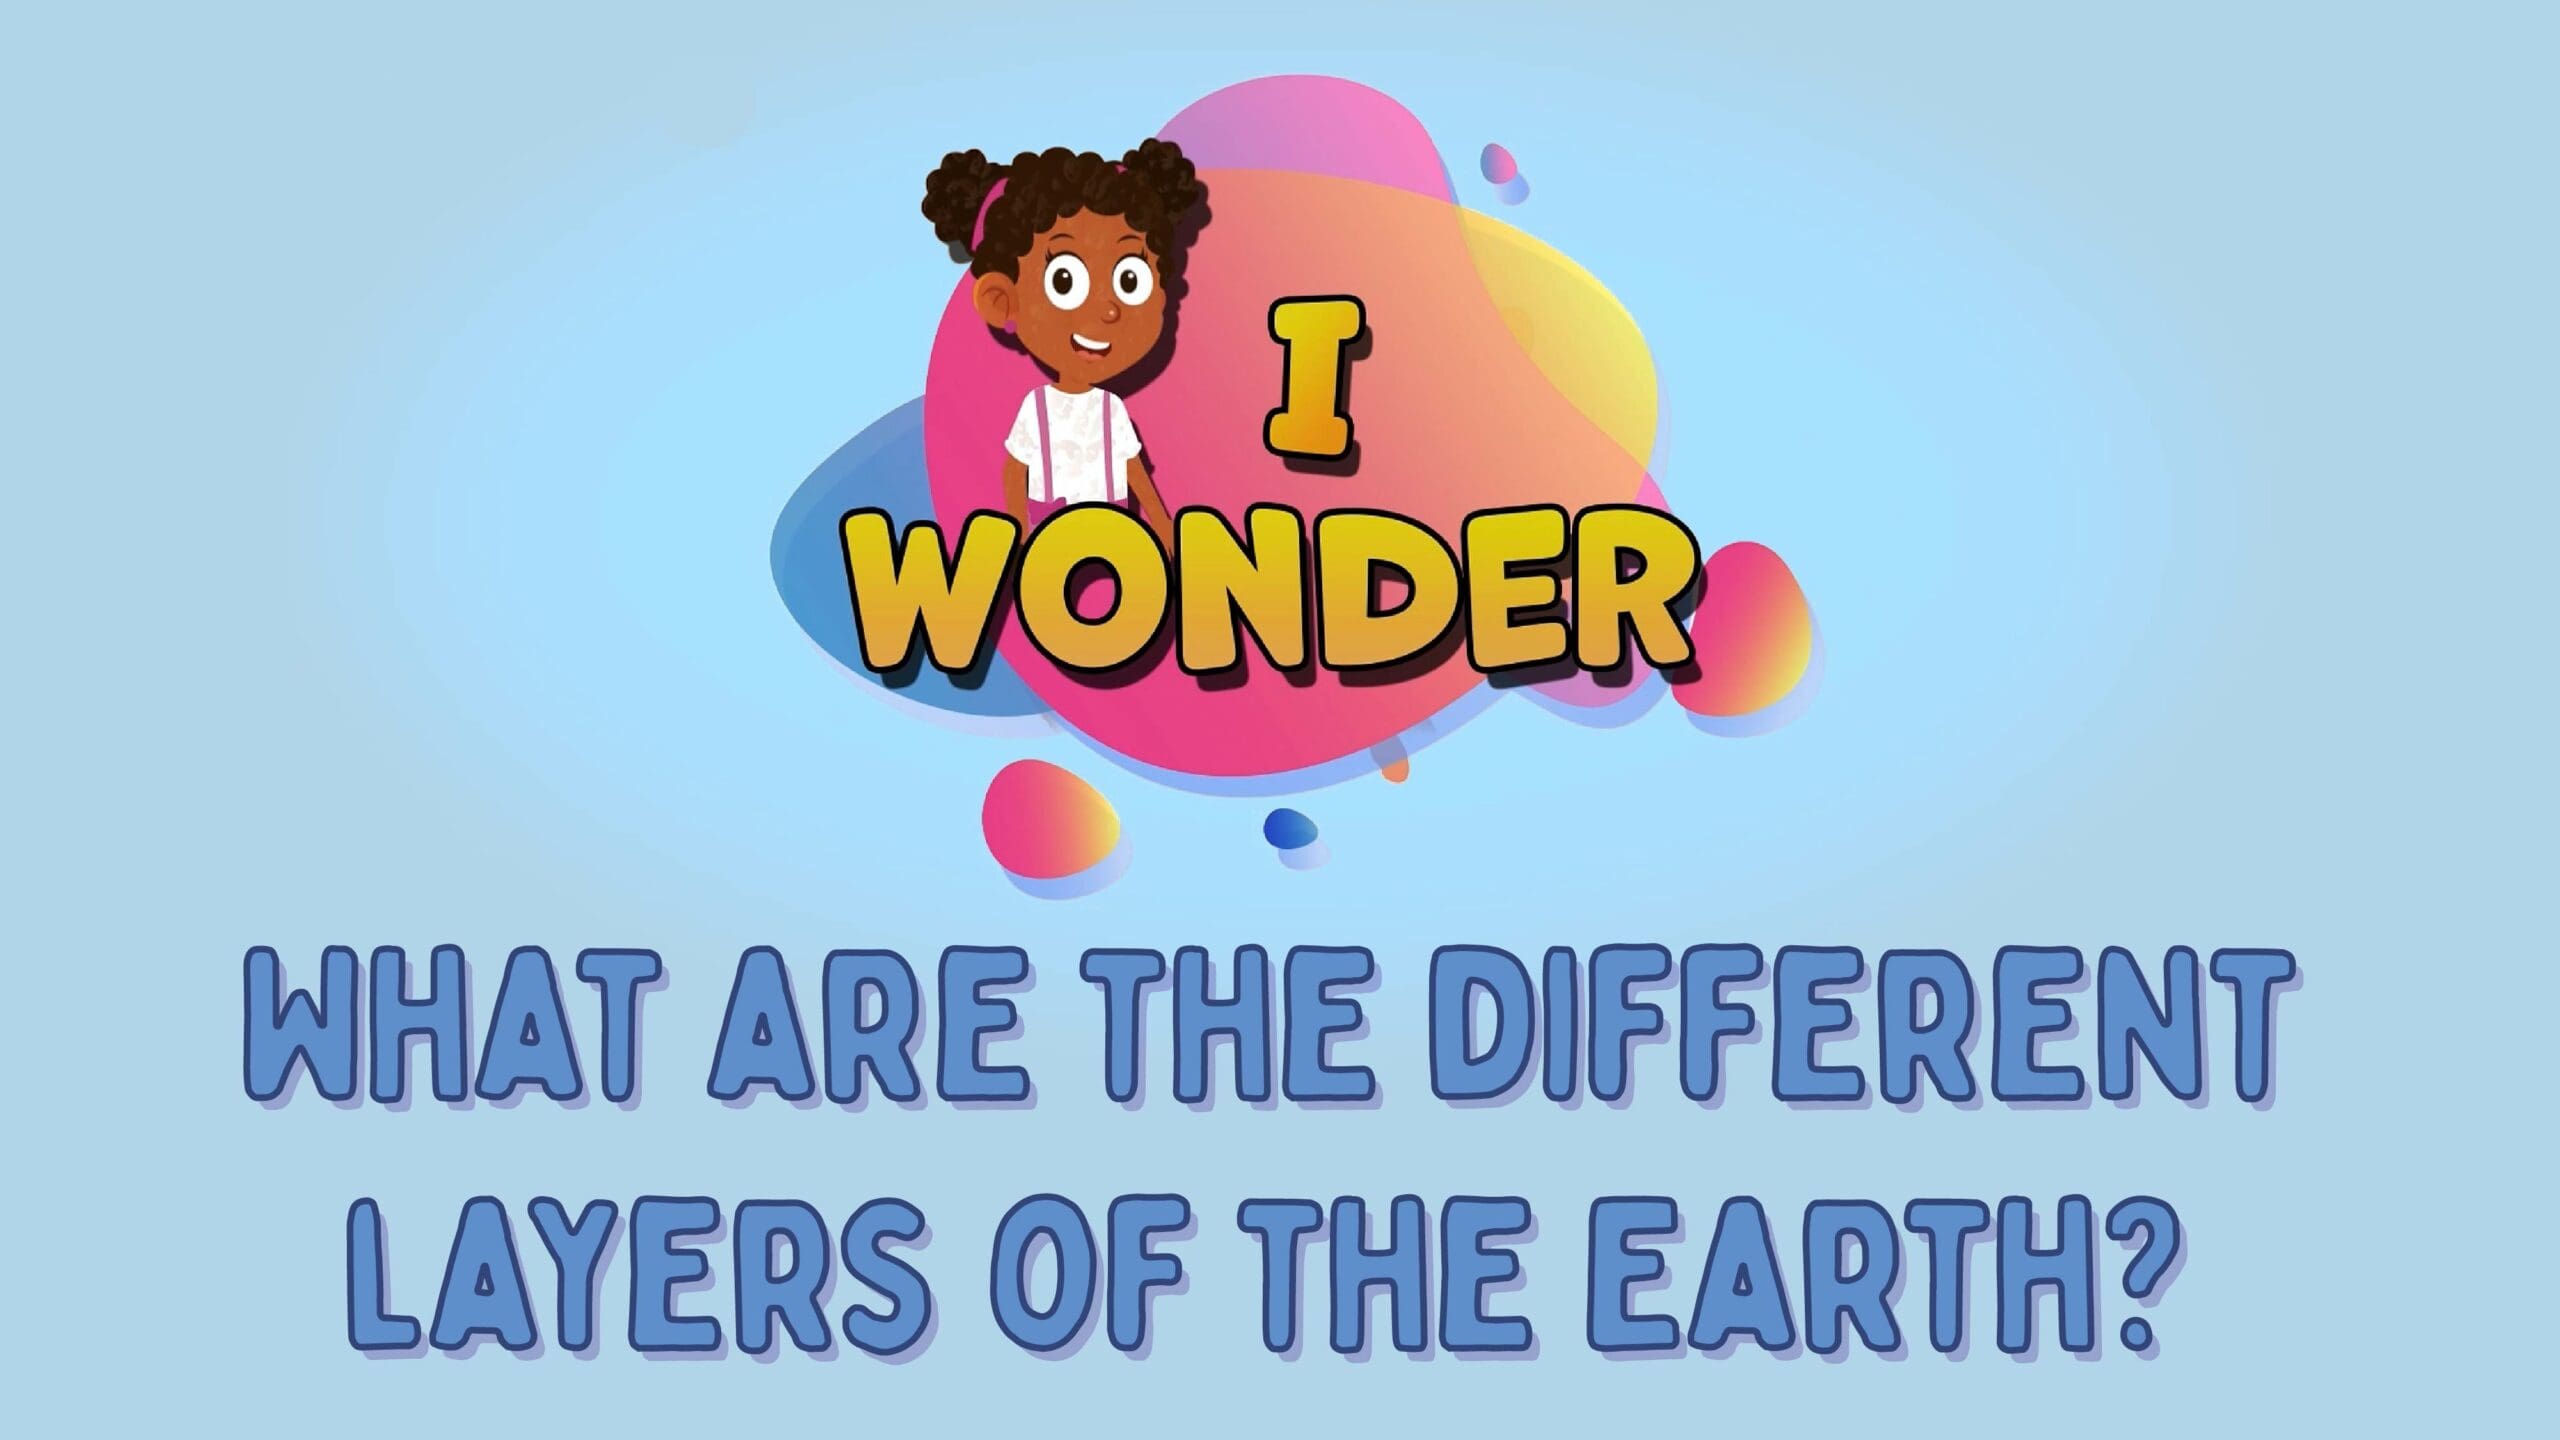 What Are The Different Layers Of The Earth?